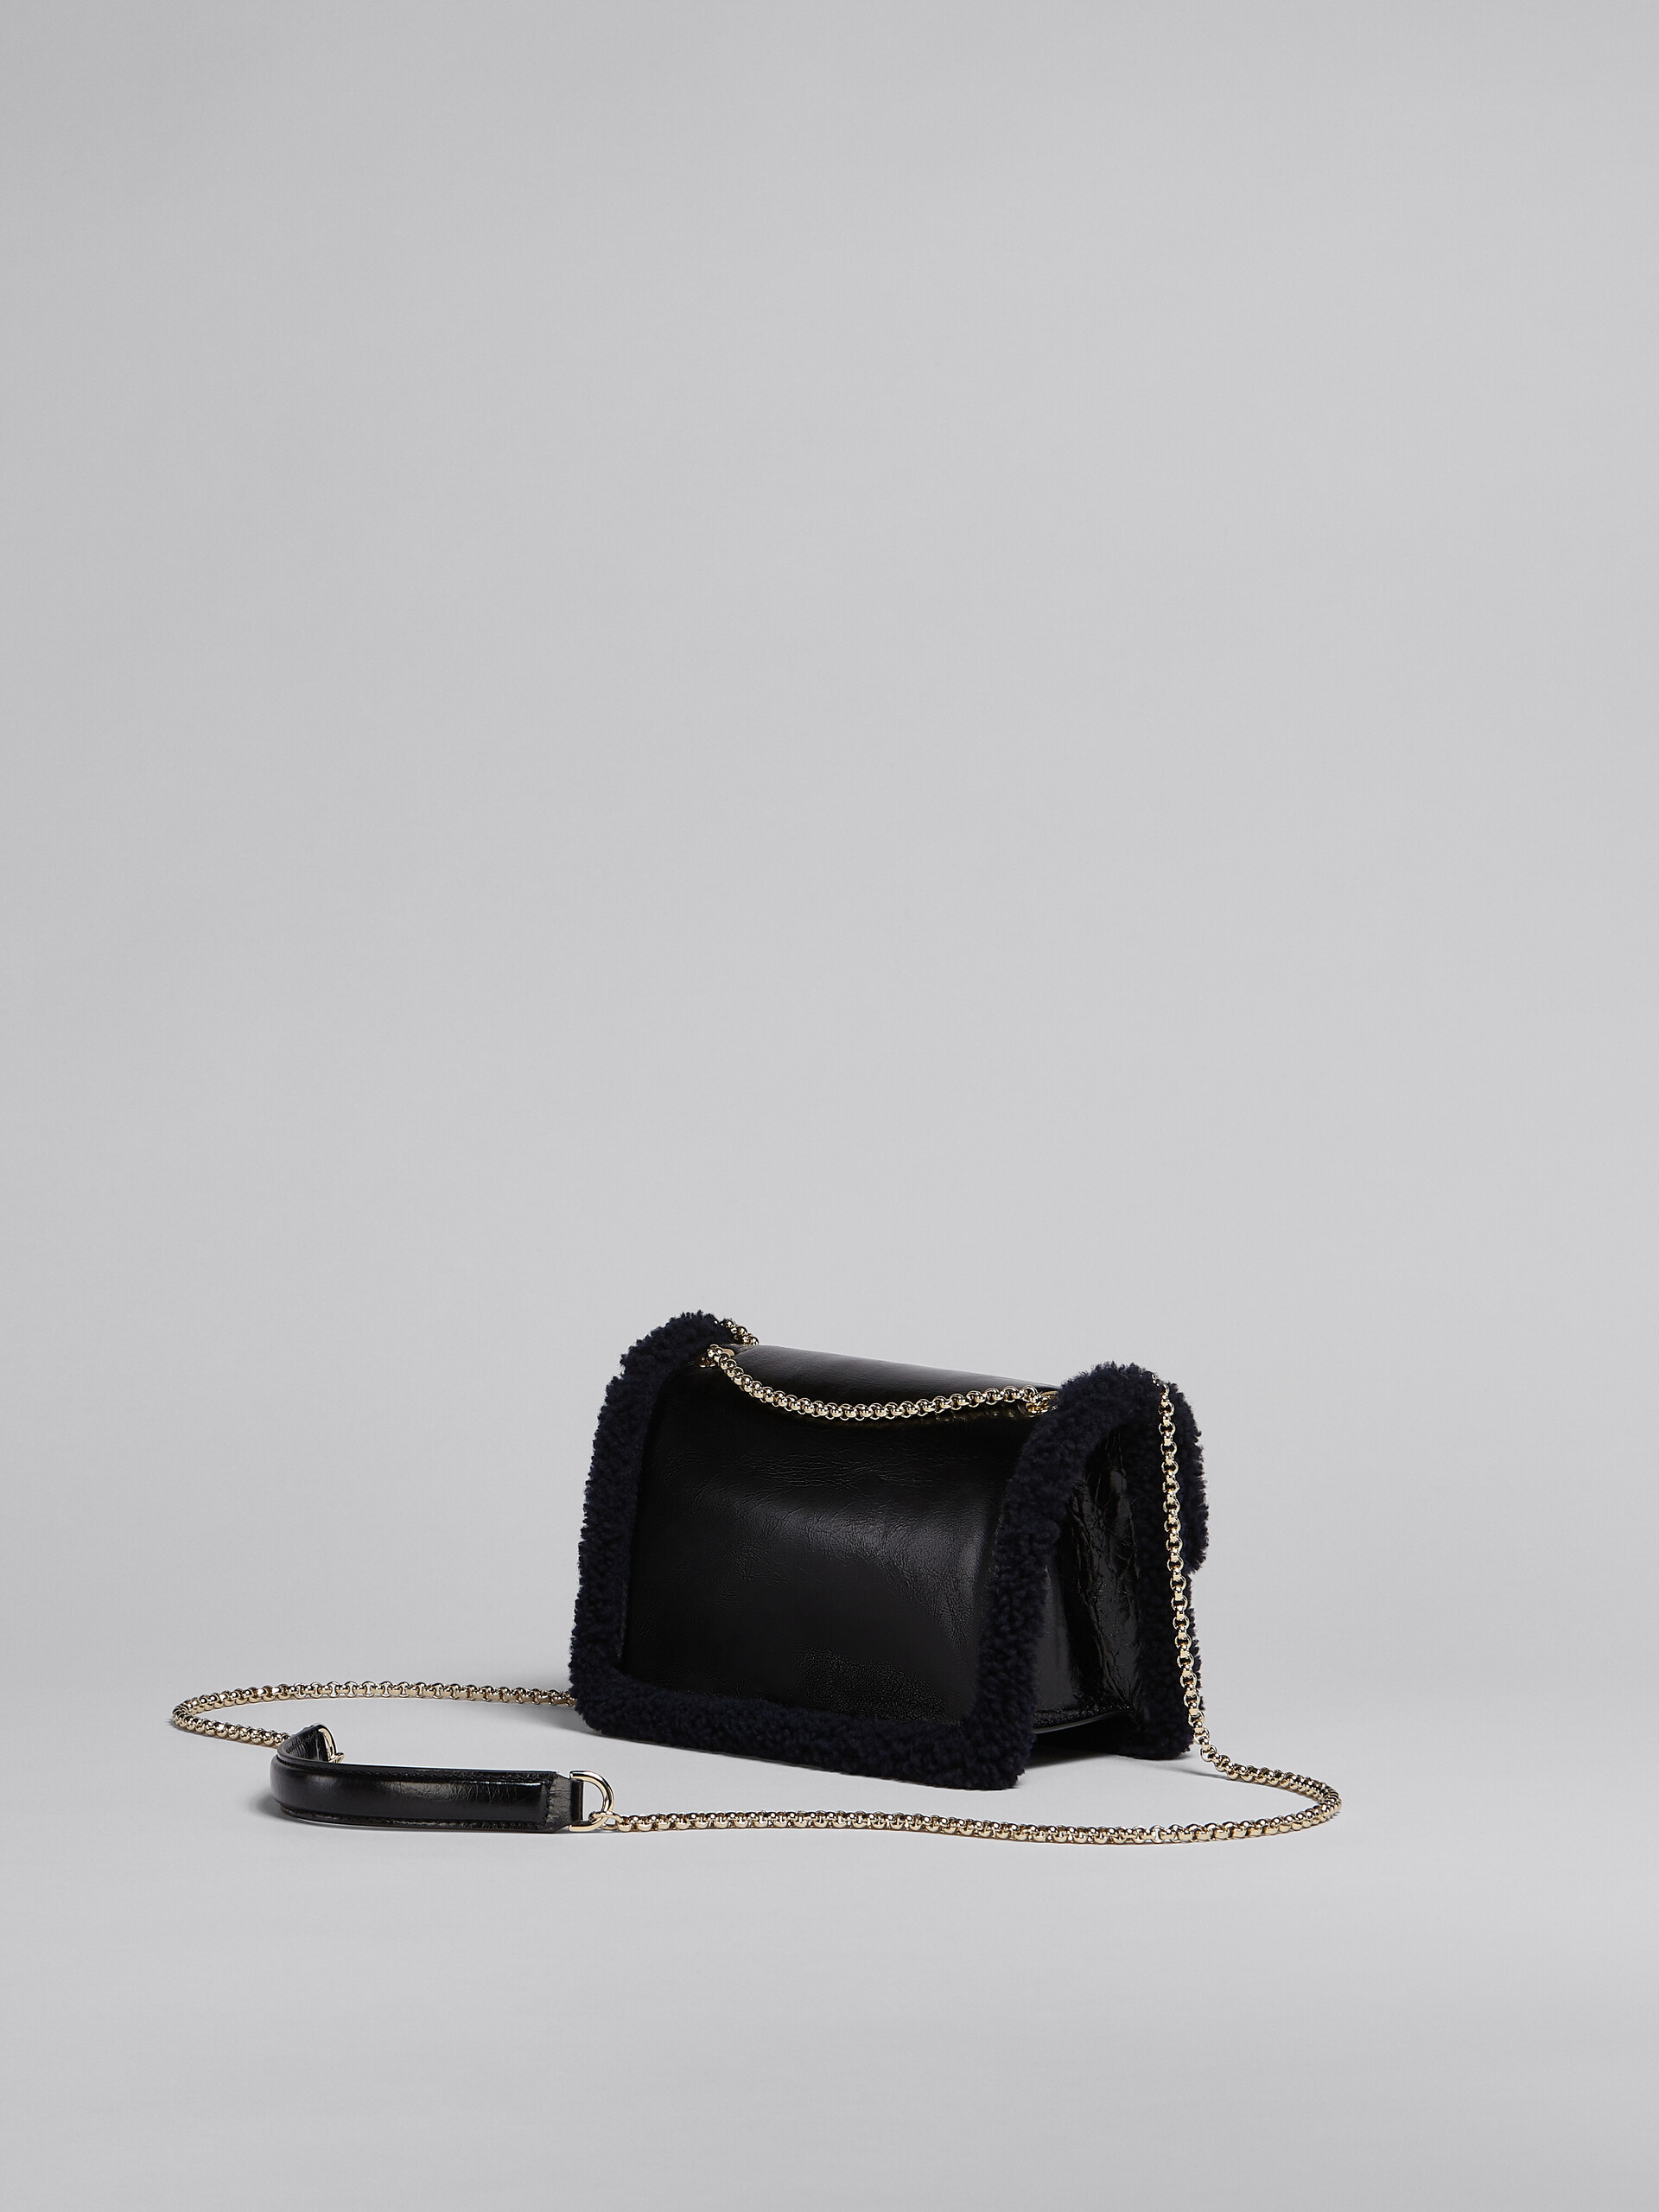 Trunk Envelope Chain in black leather and merinos - Shoulder Bags - Image 3